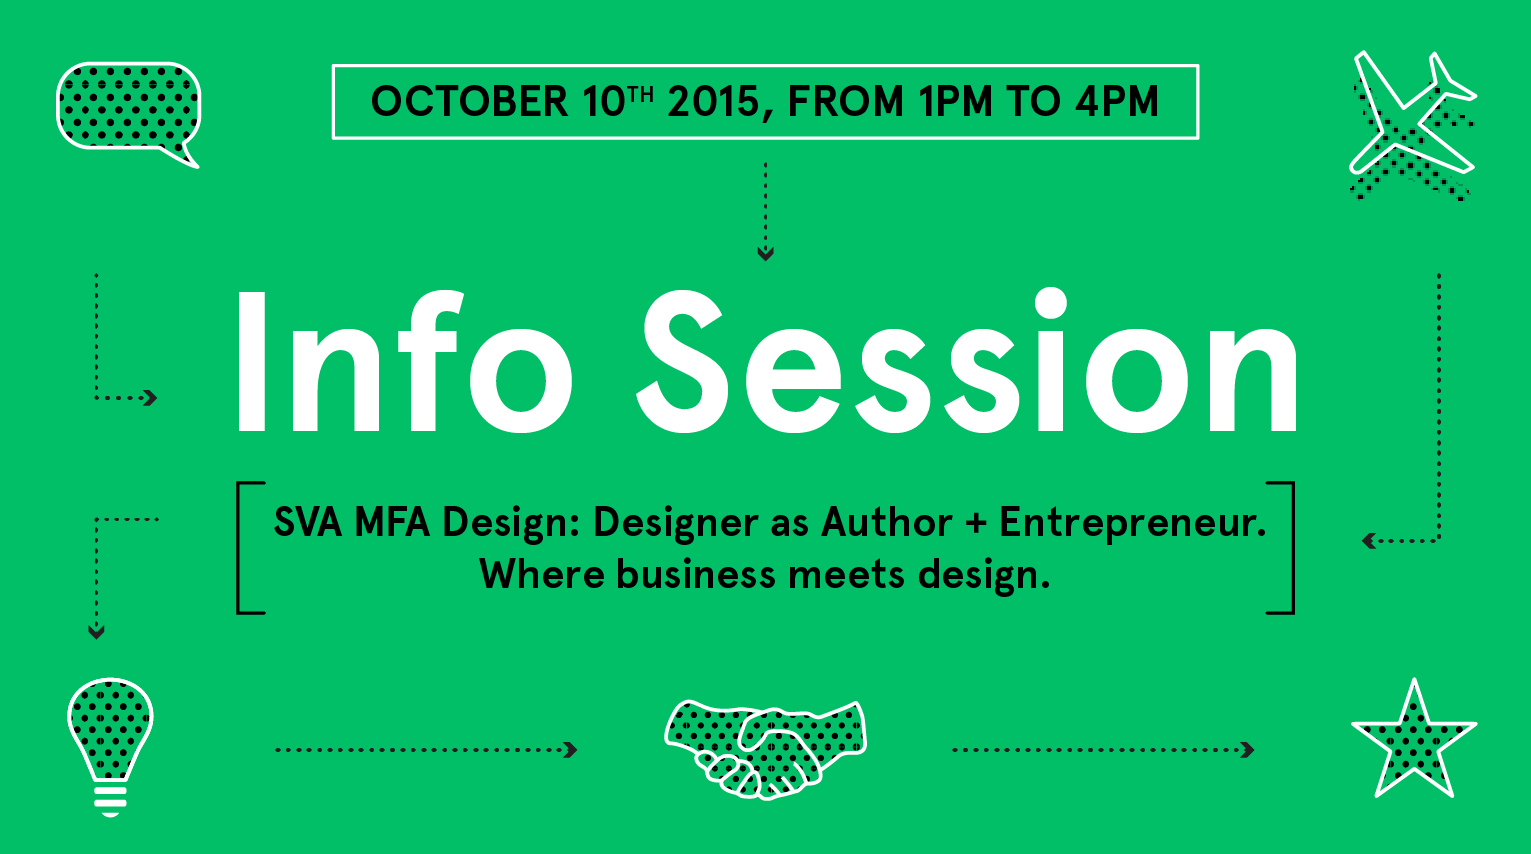 invitation for MFAD info session for 2015